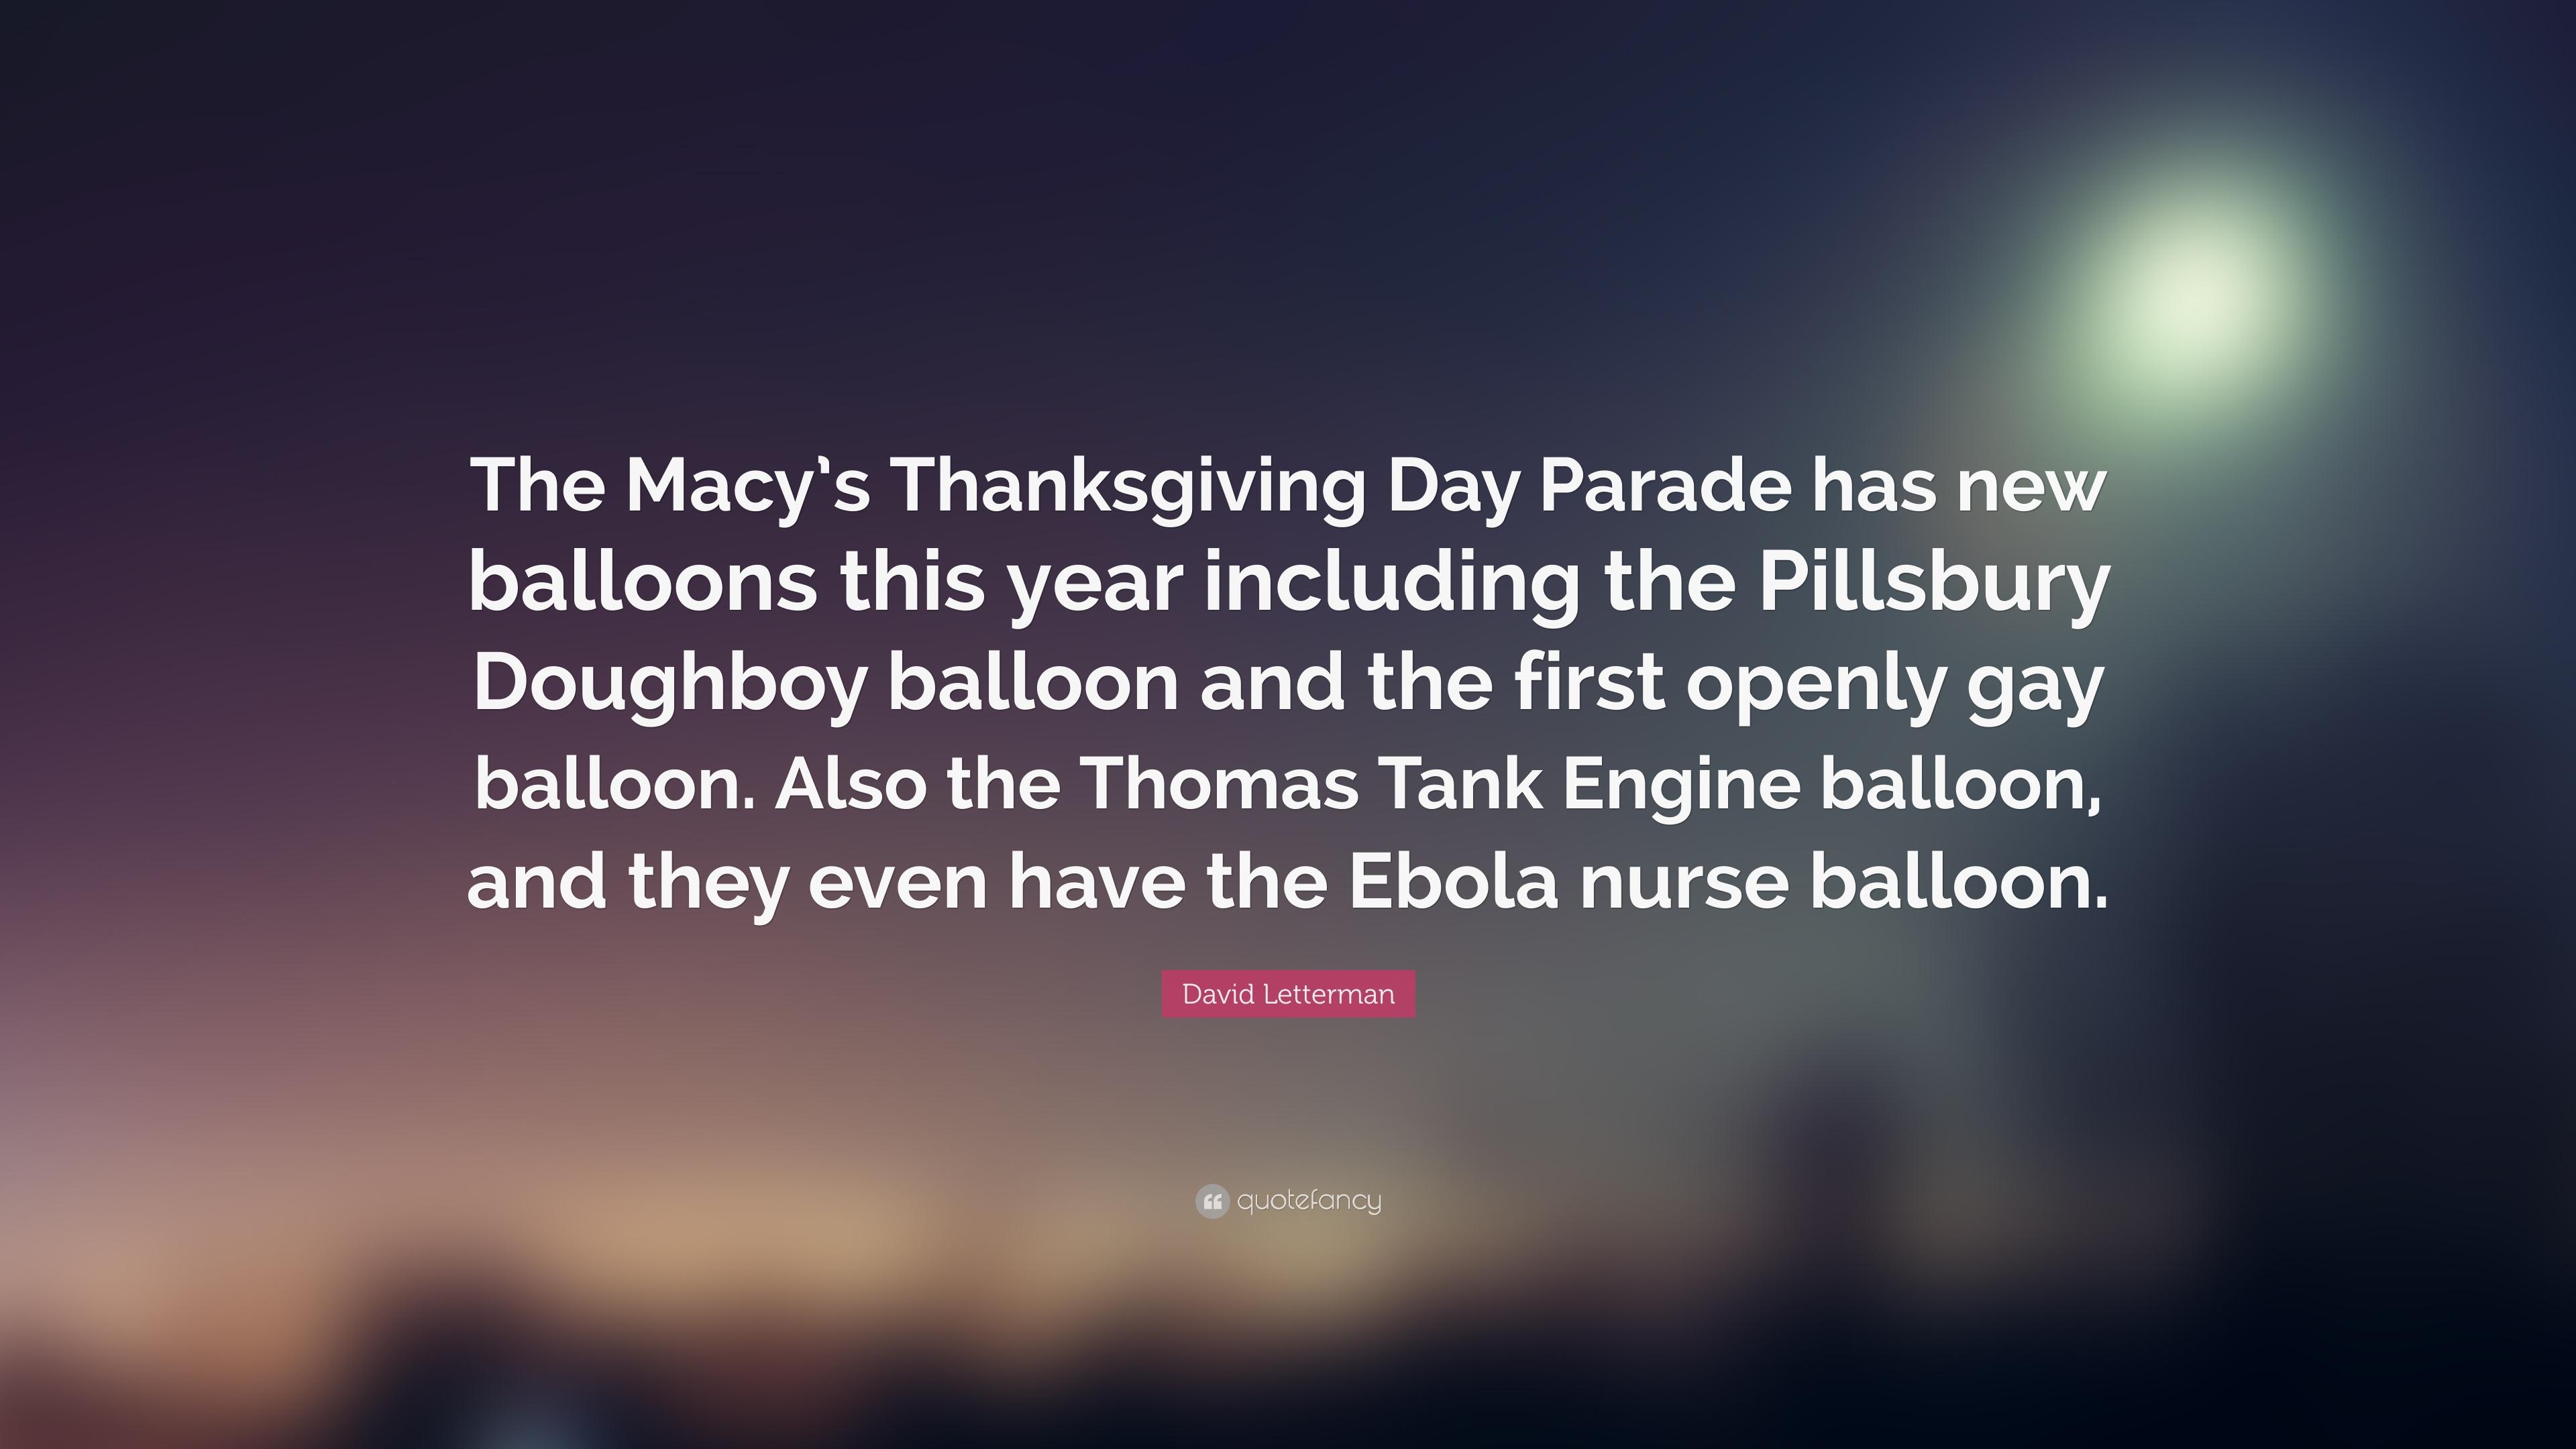 David Letterman Quote: “The Macy's Thanksgiving Day Parade has new